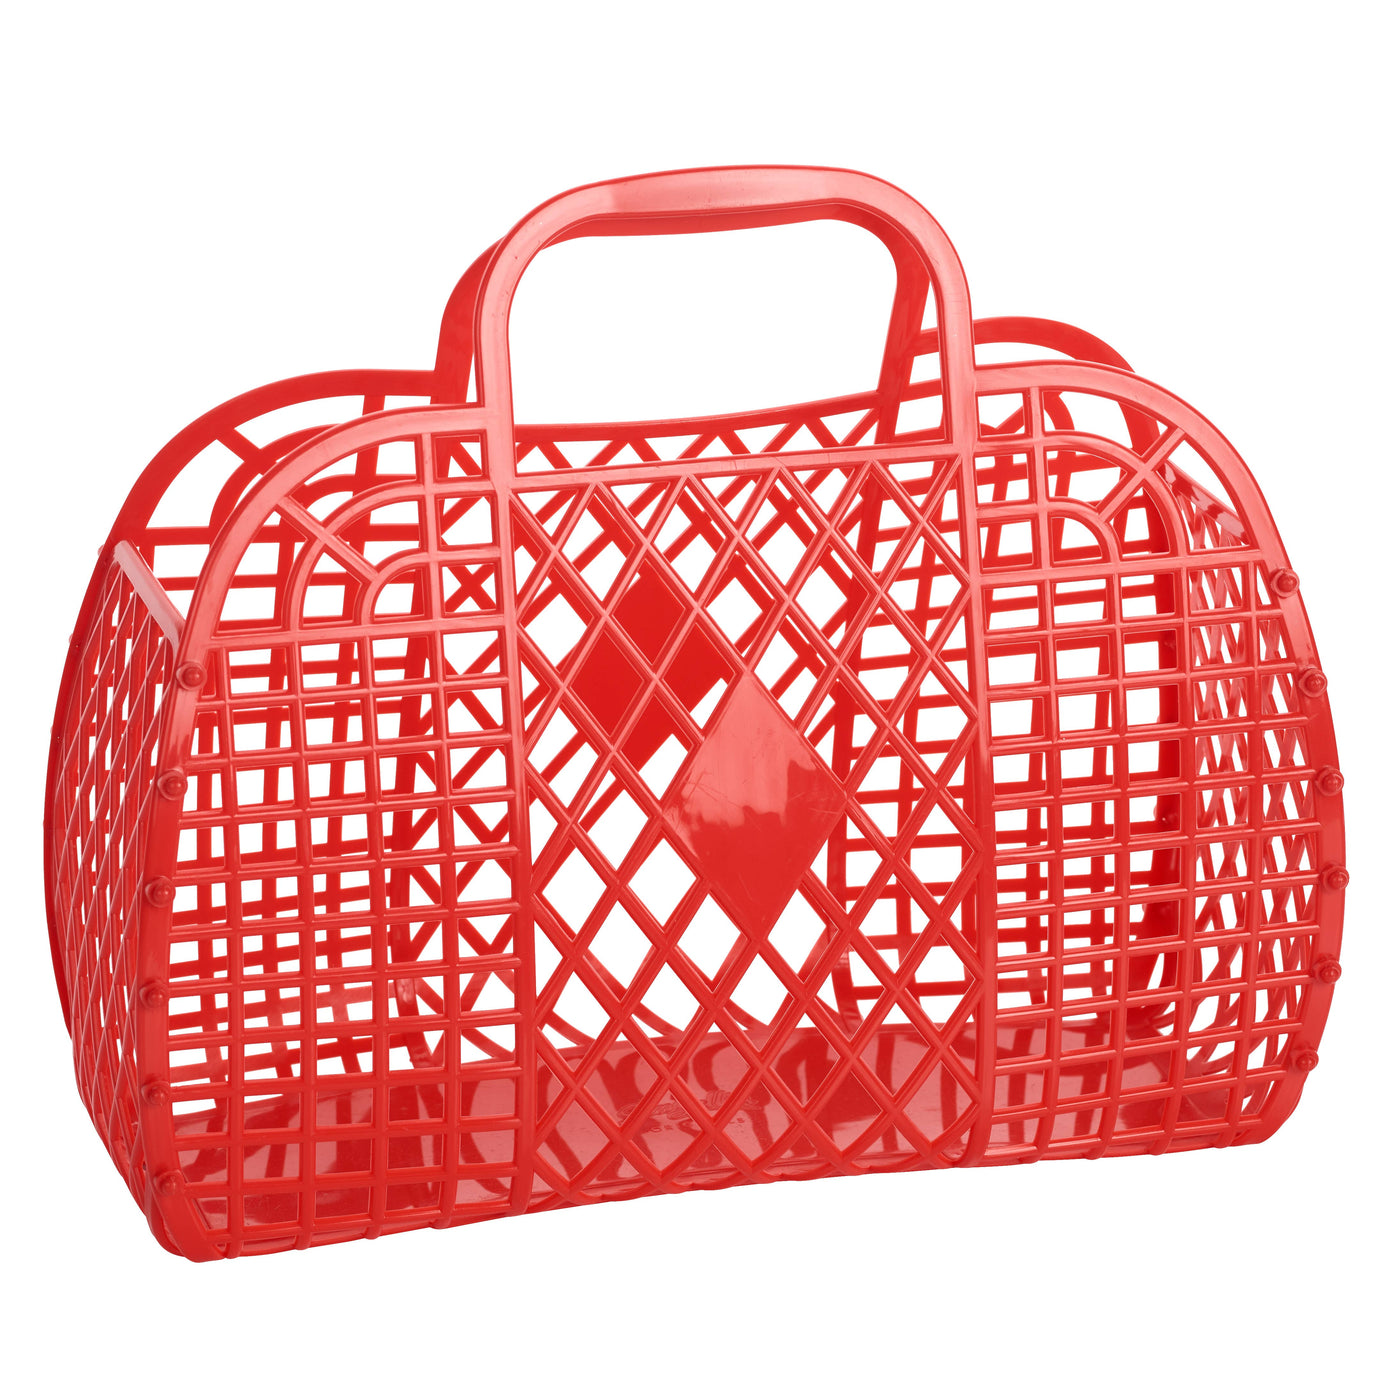 Retro Basket Jelly Bag - Large Red